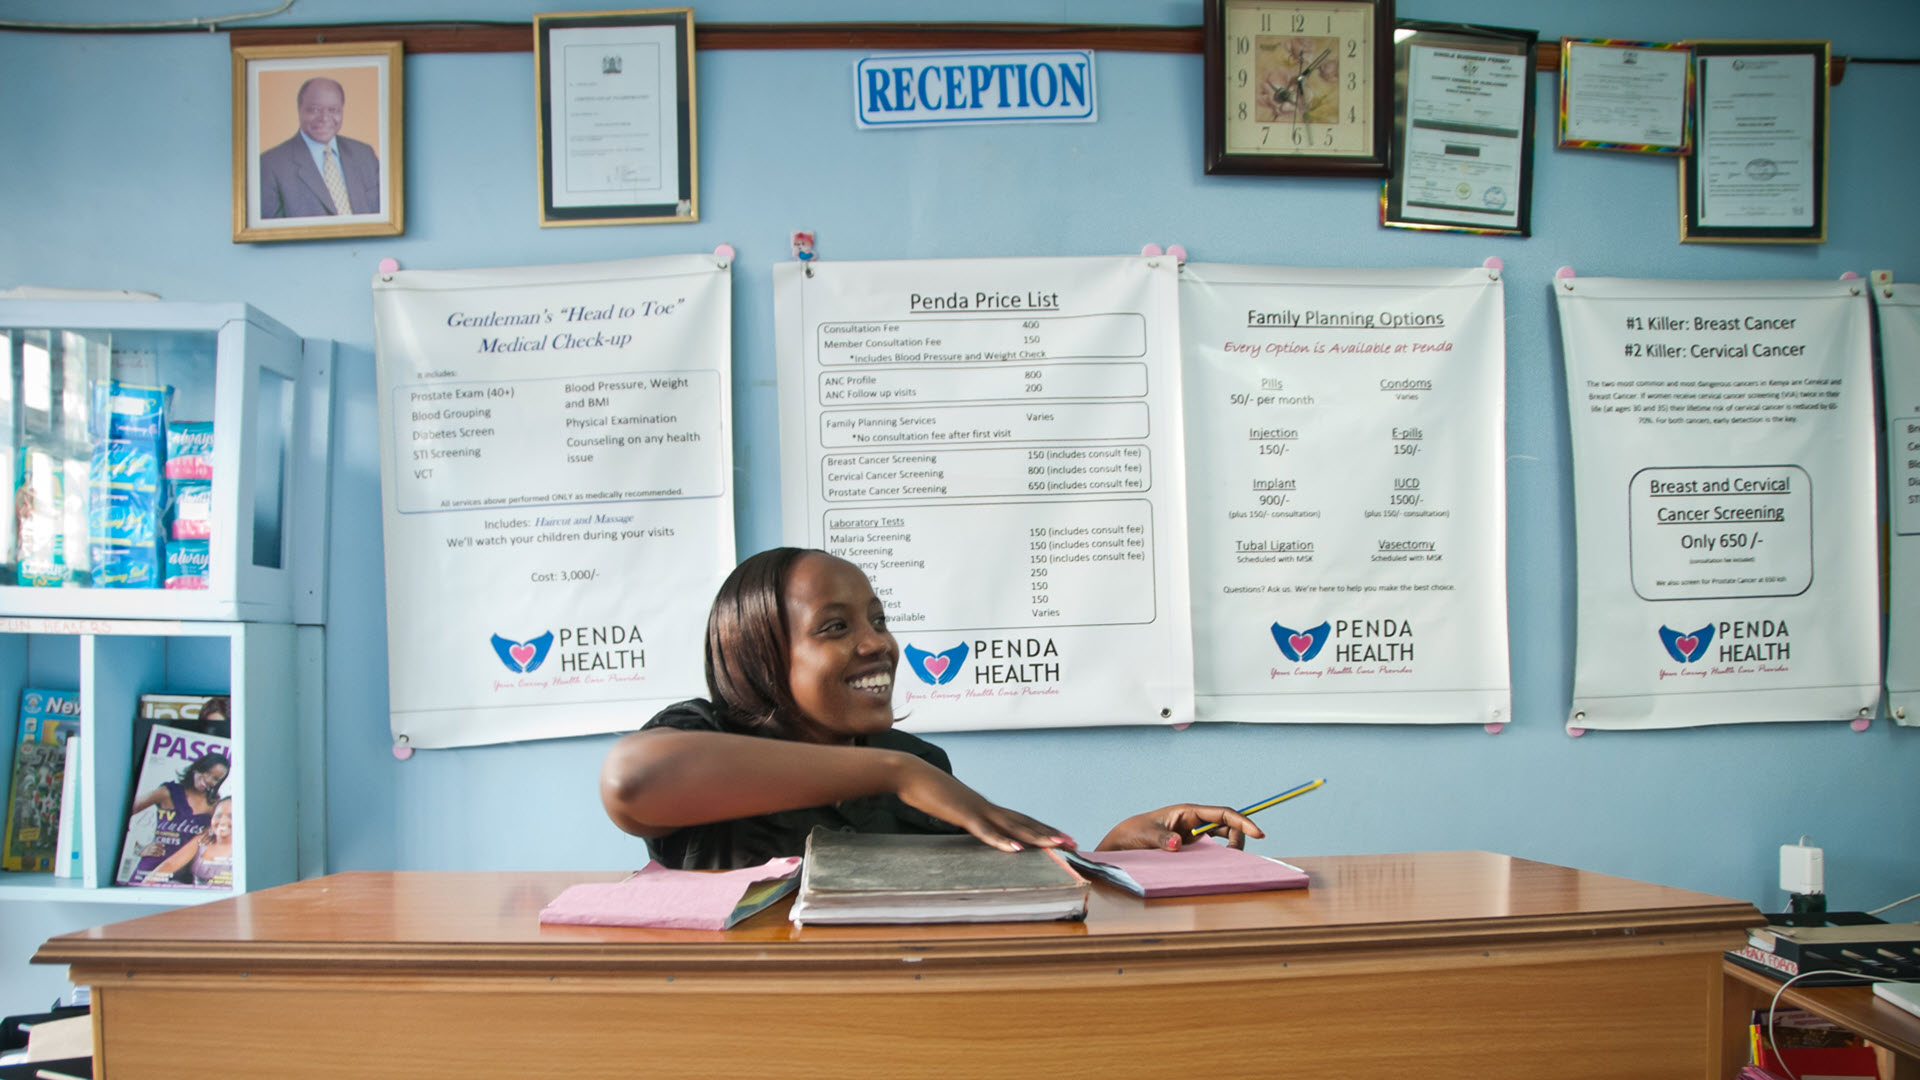 A inside look at one Penda Health's private clinics